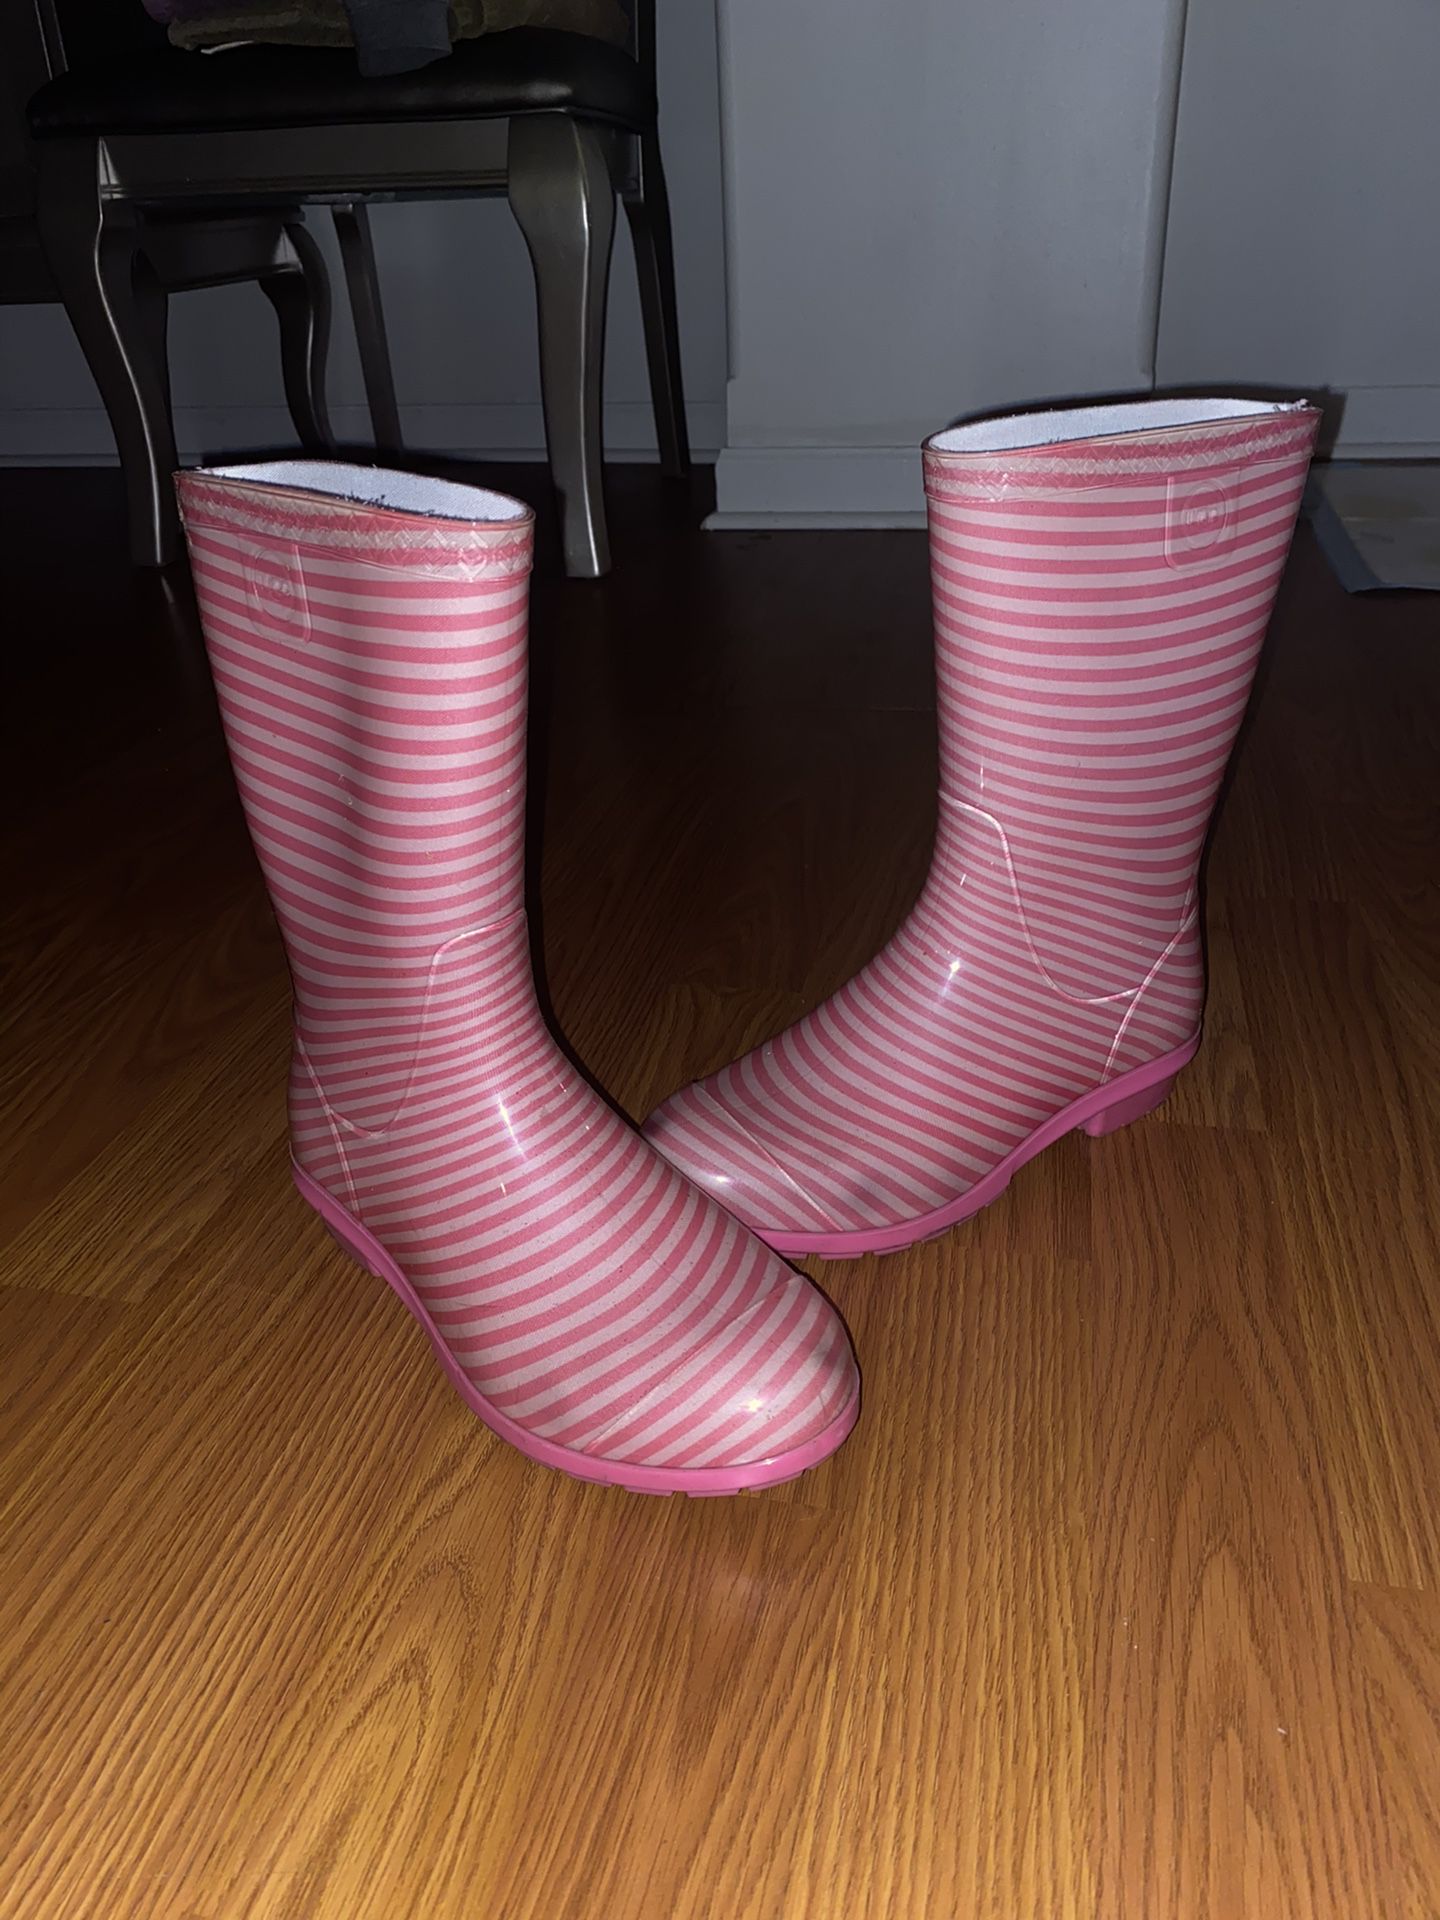 UGG - Pink and White Girl Boots - Size 5